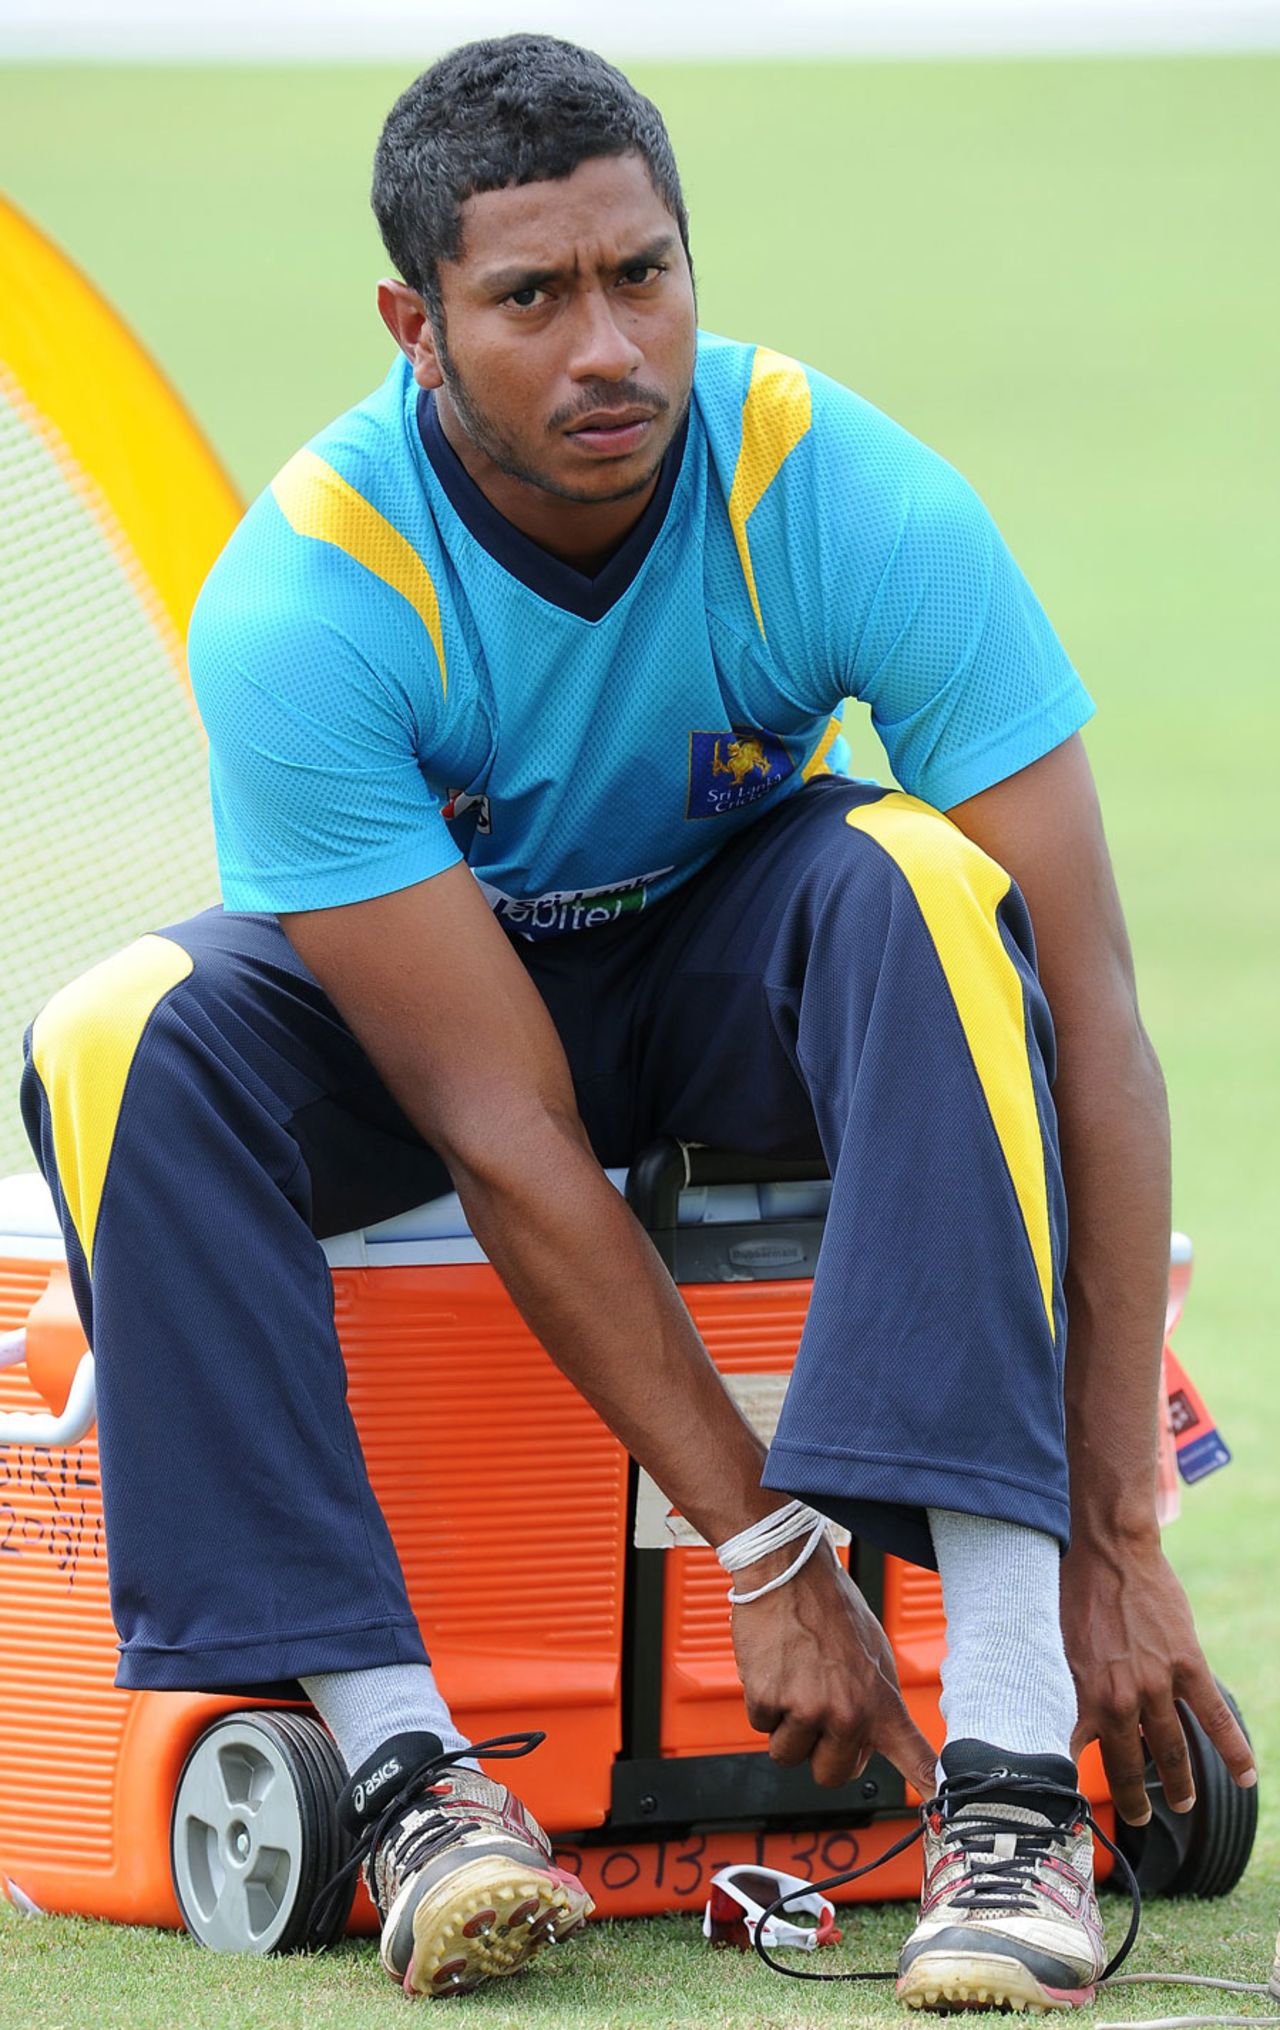 Kithuruwan Vithanage during a practice session in Galle, ahead of the Test series against Bangladesh, Bangladesh tour to Sri Lanka, Galle, March 6, 2013